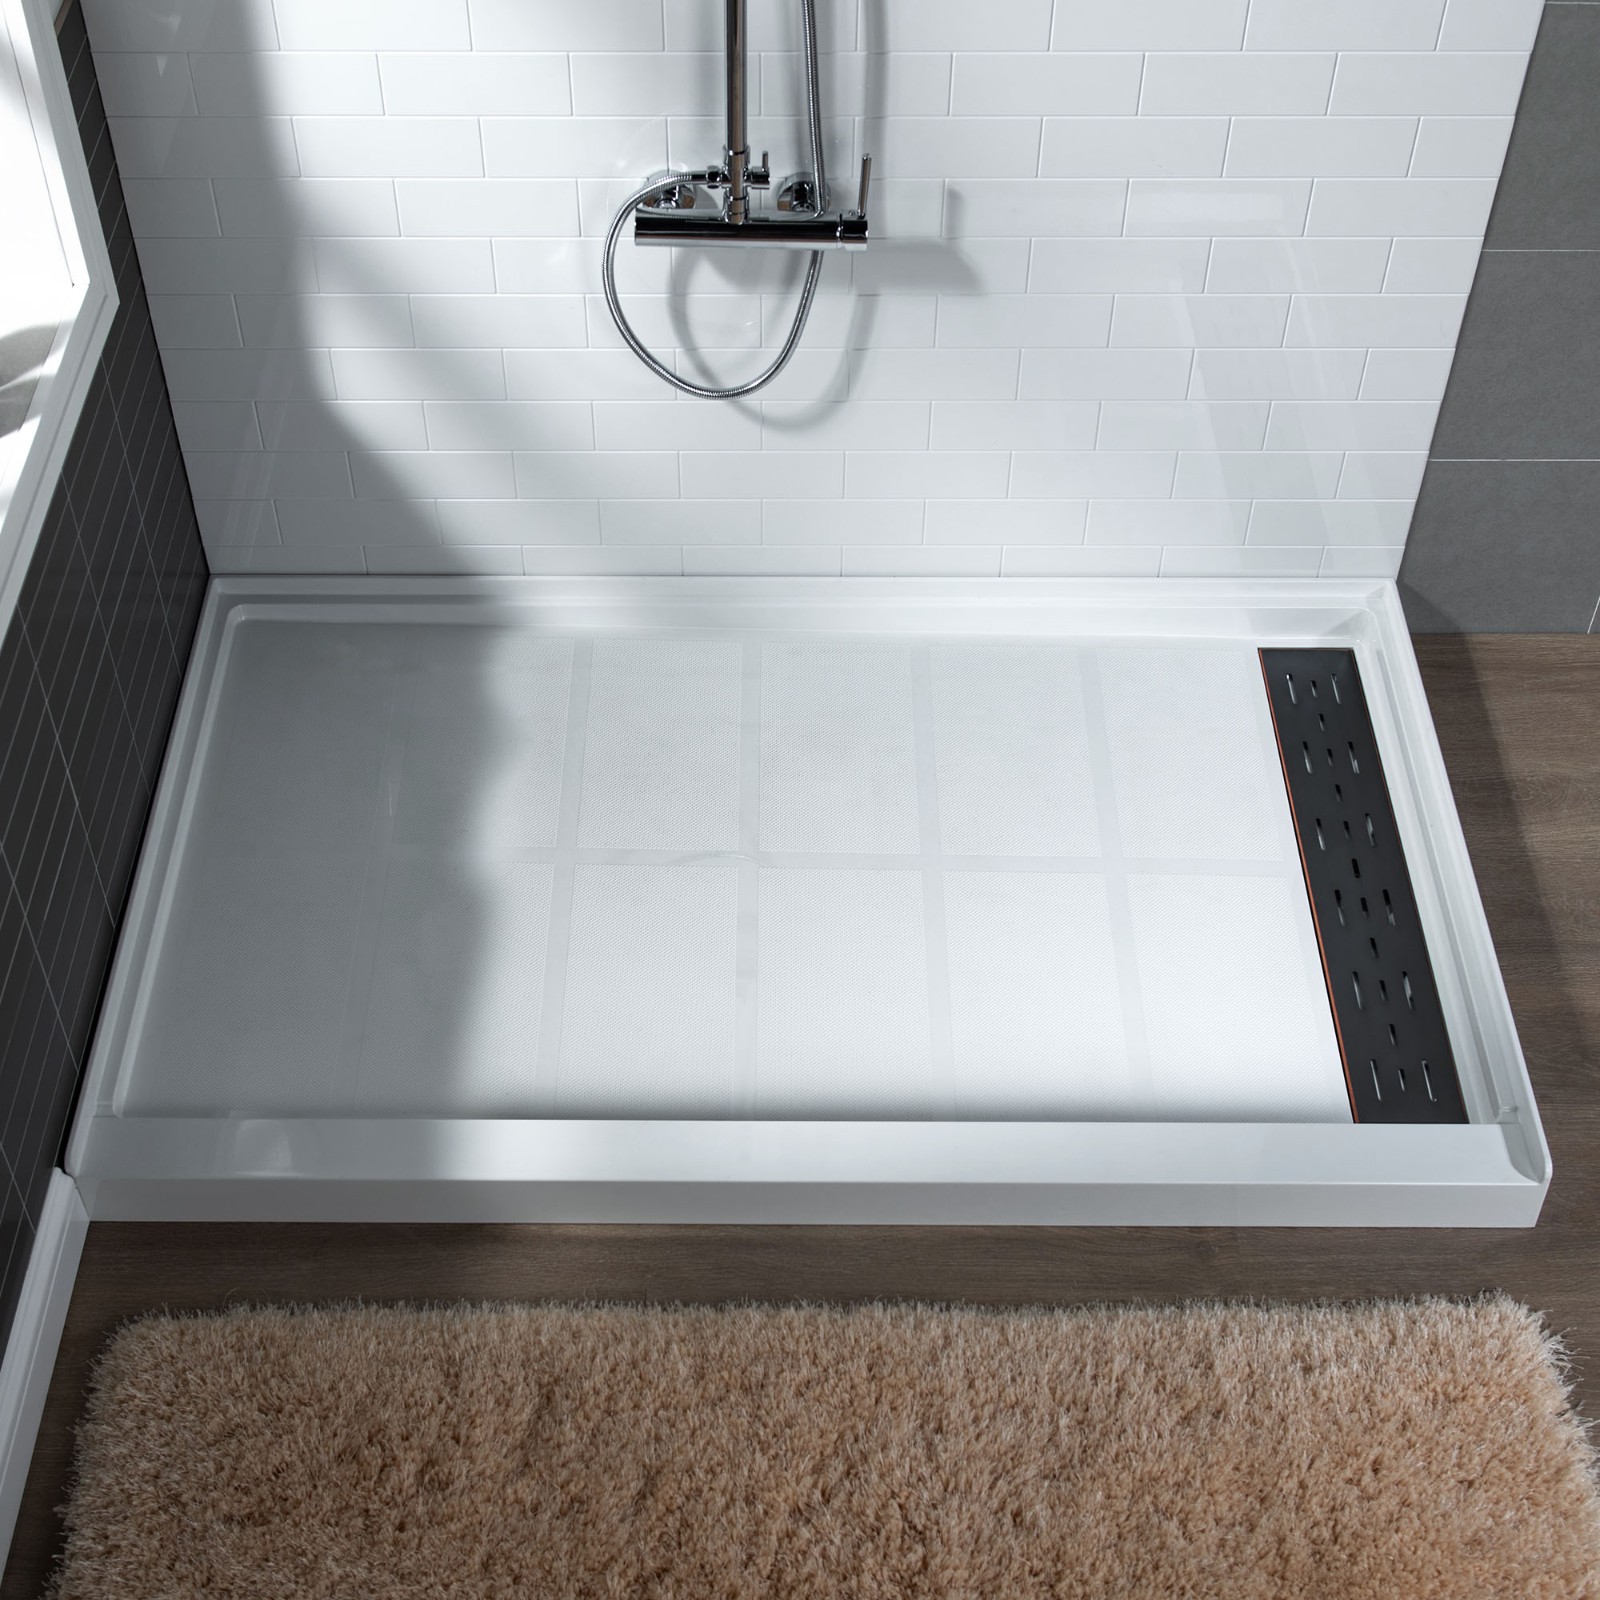  WOODBRIDGE SBR6030-1000R-ORB SolidSurface Shower Base with Recessed Trench Side Including Oil Rubbed Bronze Linear Cover, 60